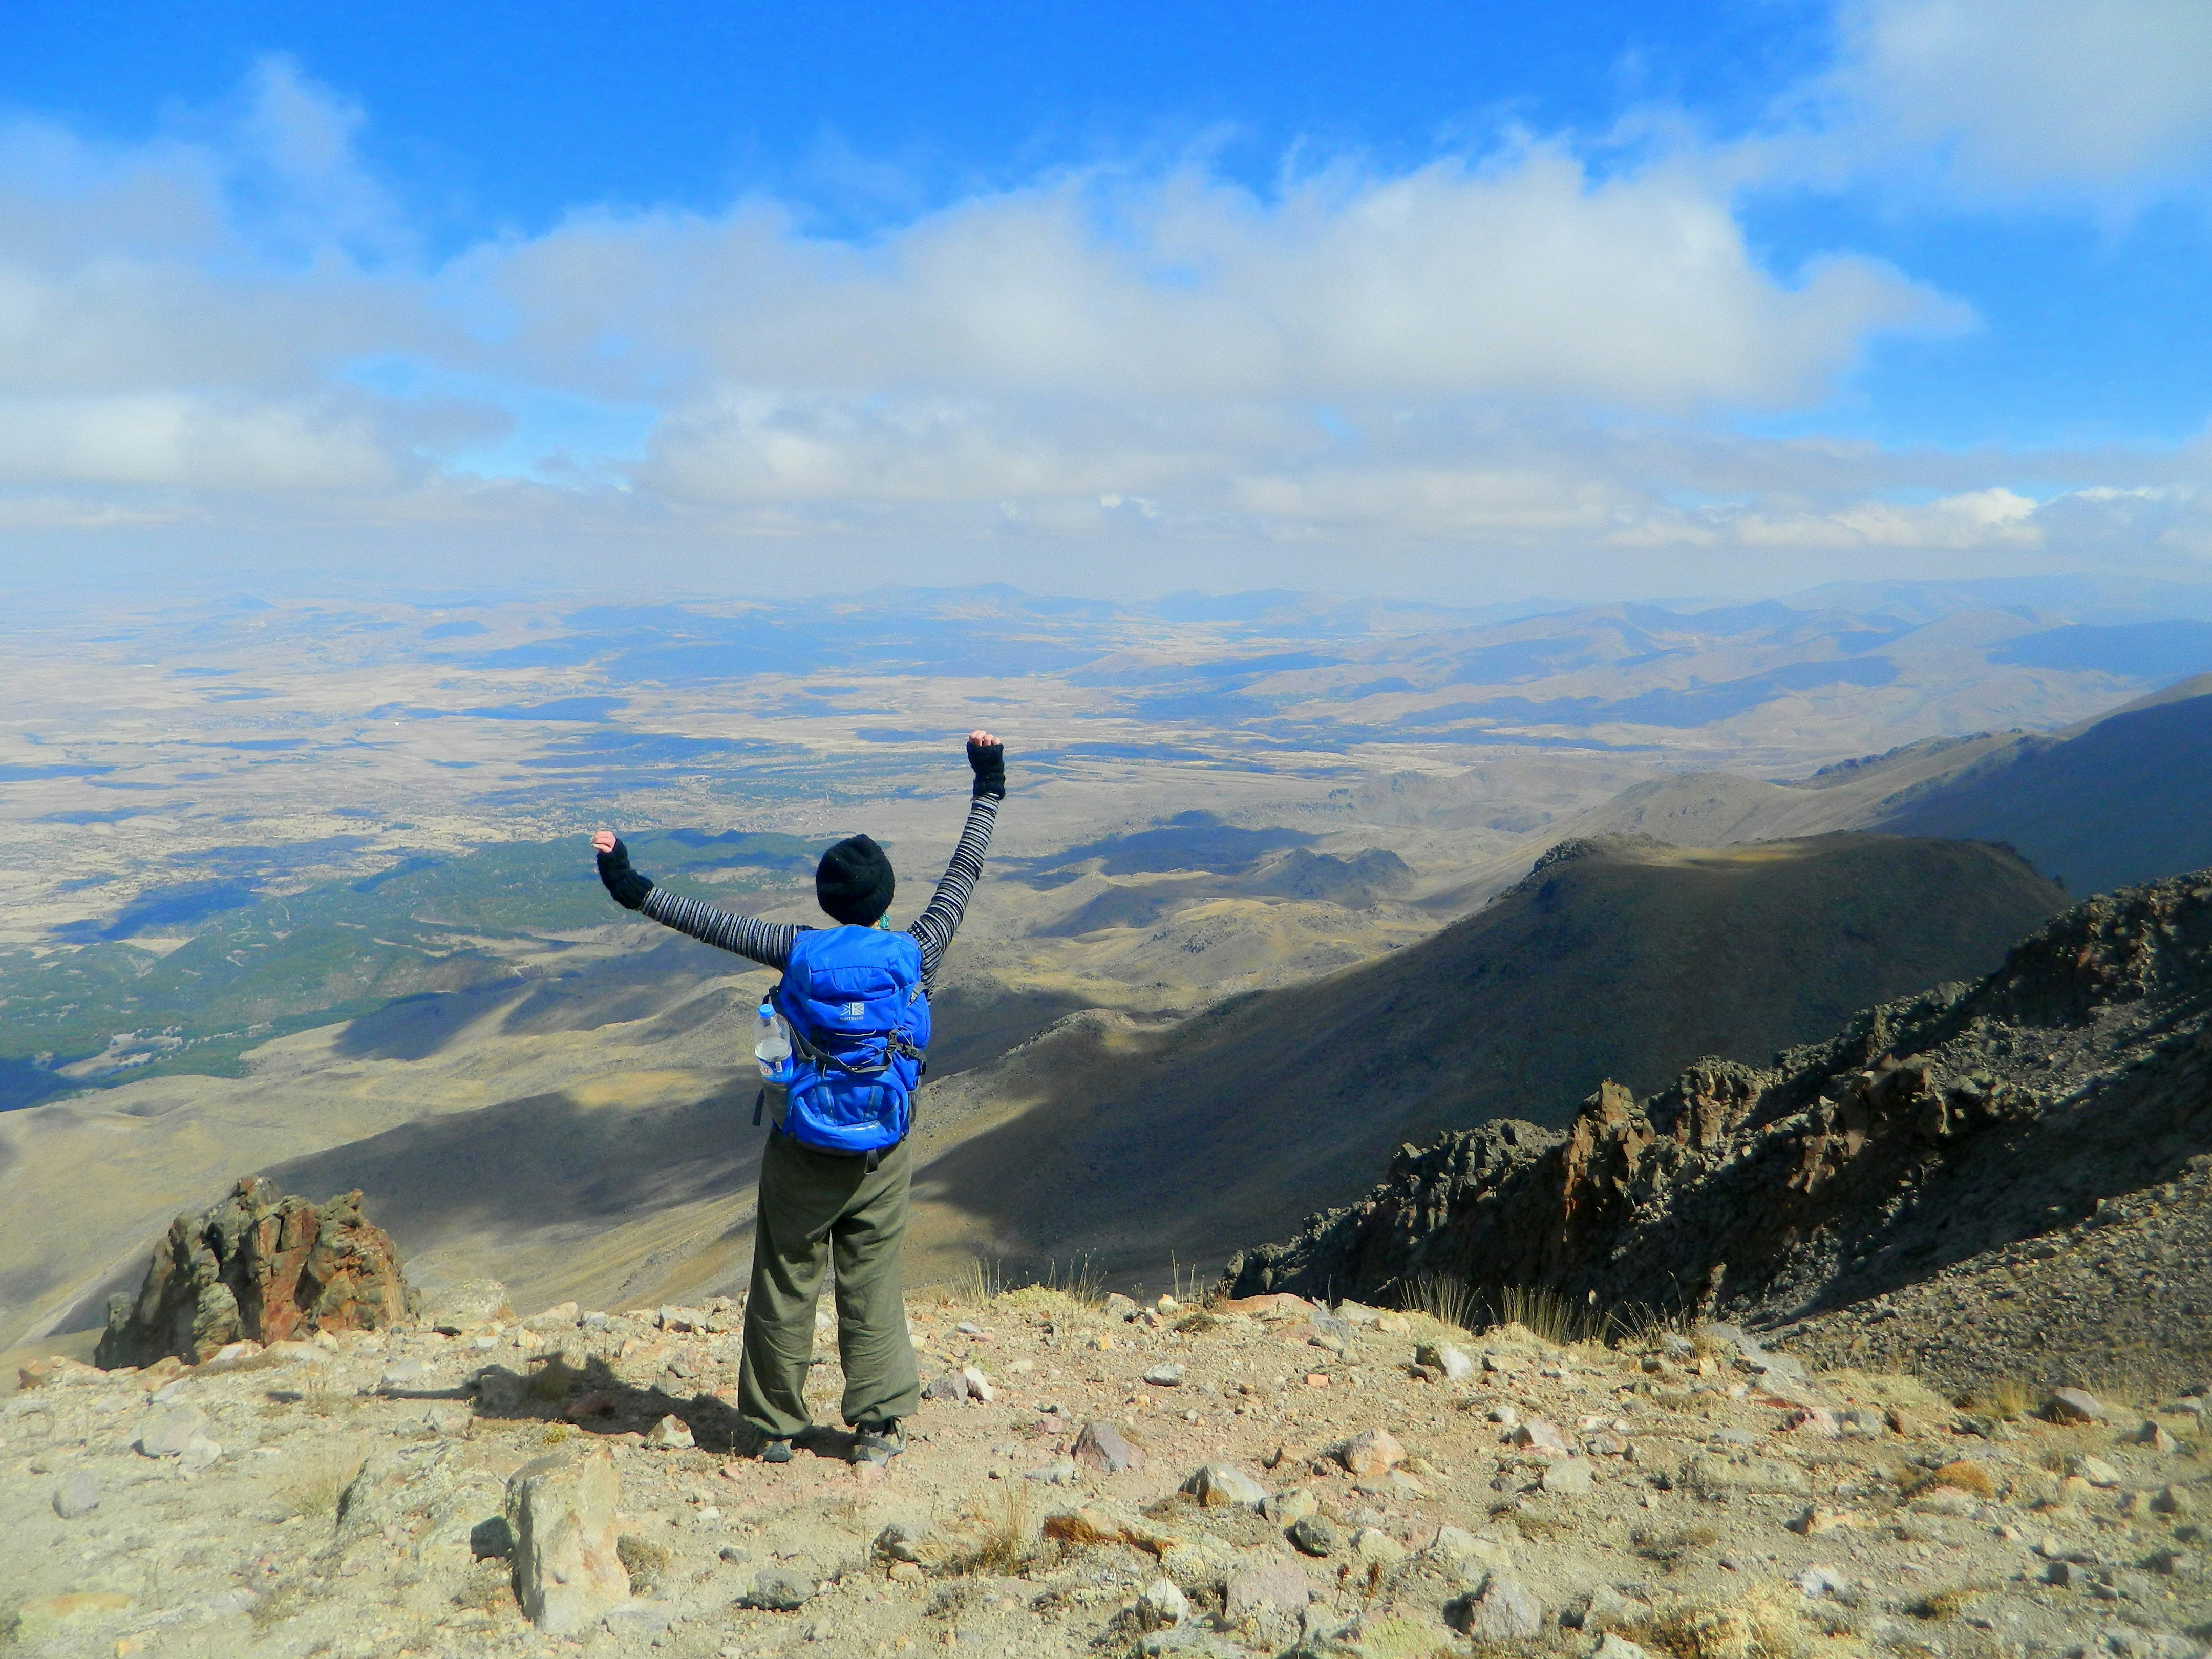 Write Jess Lee climbing Mt Hasan, Turkey; she faces away from the camera waving her arms aloft, staring over a barren yet beautiful landscape.